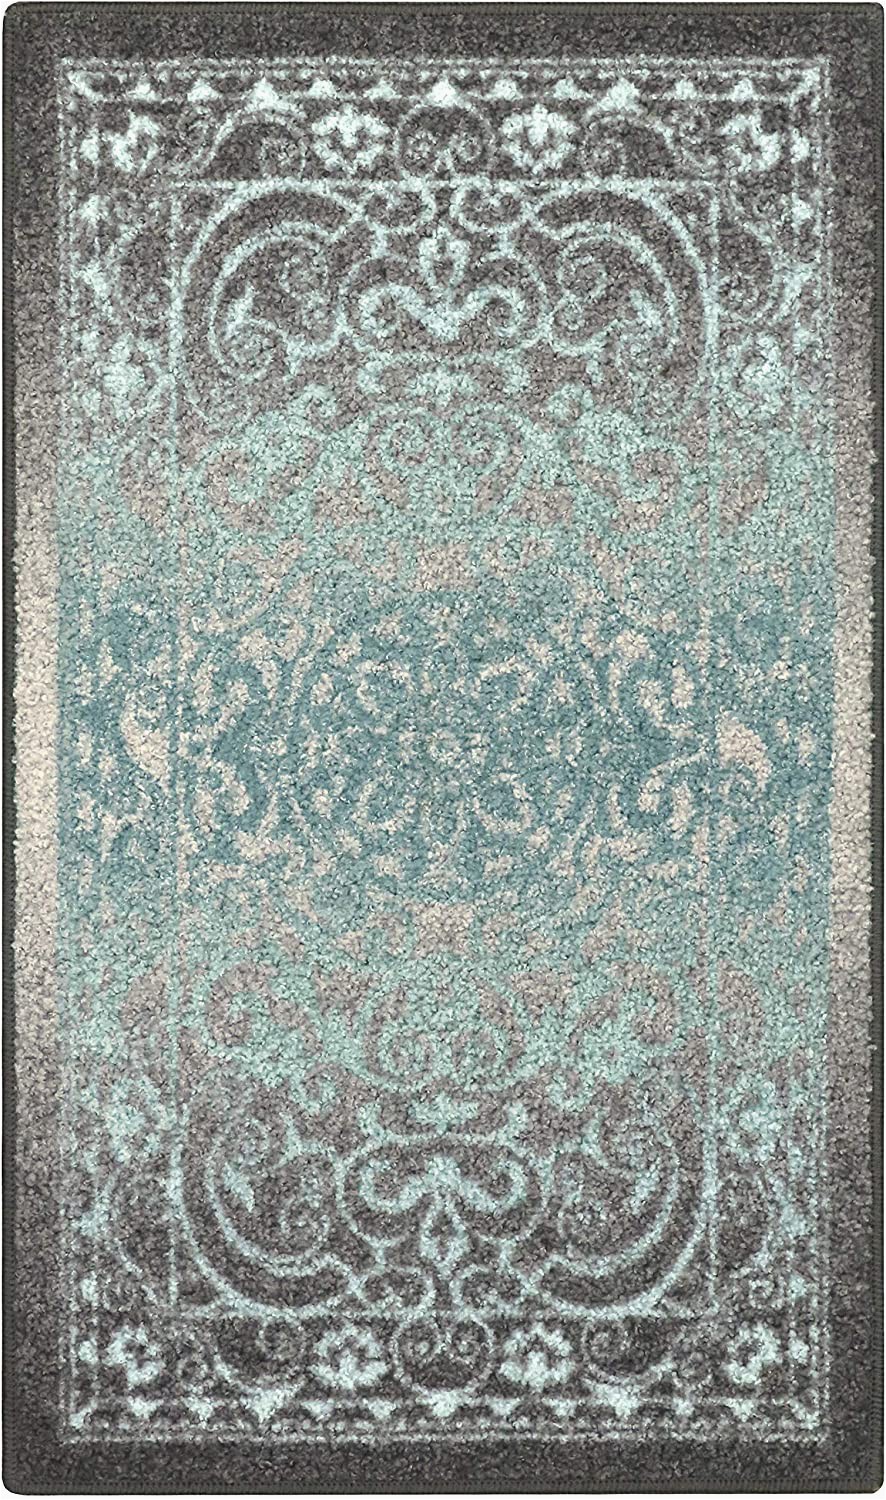 Non Skid Kitchen area Rugs Kitchen Rugs Maples Rugs [made In Usa][pelham] 2 6 X 3 10 Non Slip Padded Small area Rugs for Living Room Bedroom and Entryway Grey Blue